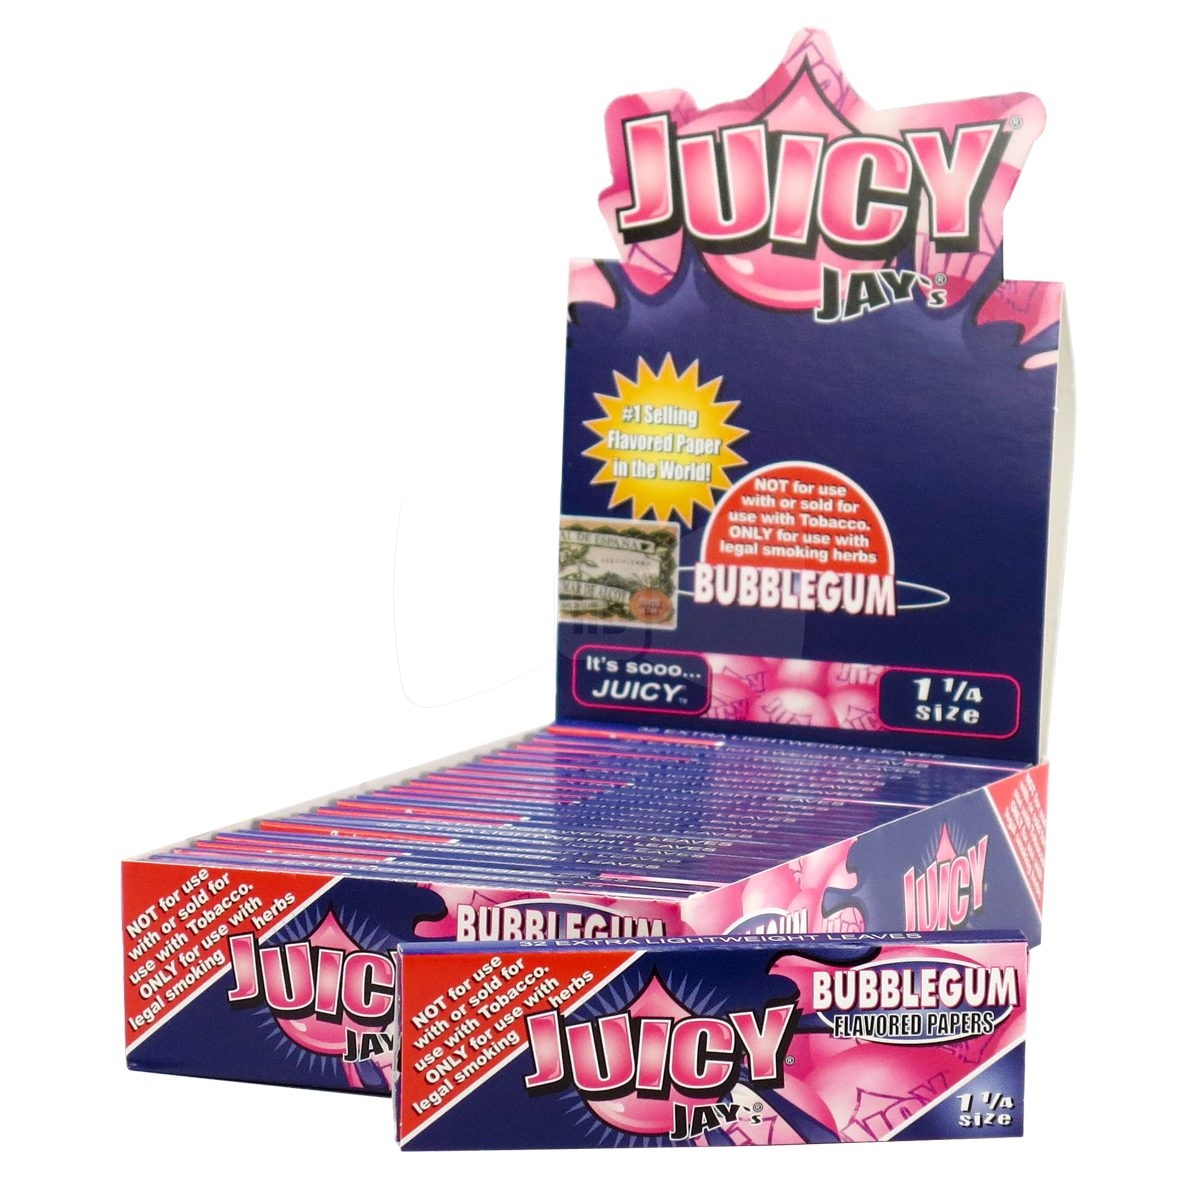 Juicy Jays Bubblegum Rolling Papers Full Box (24 packs) King Size